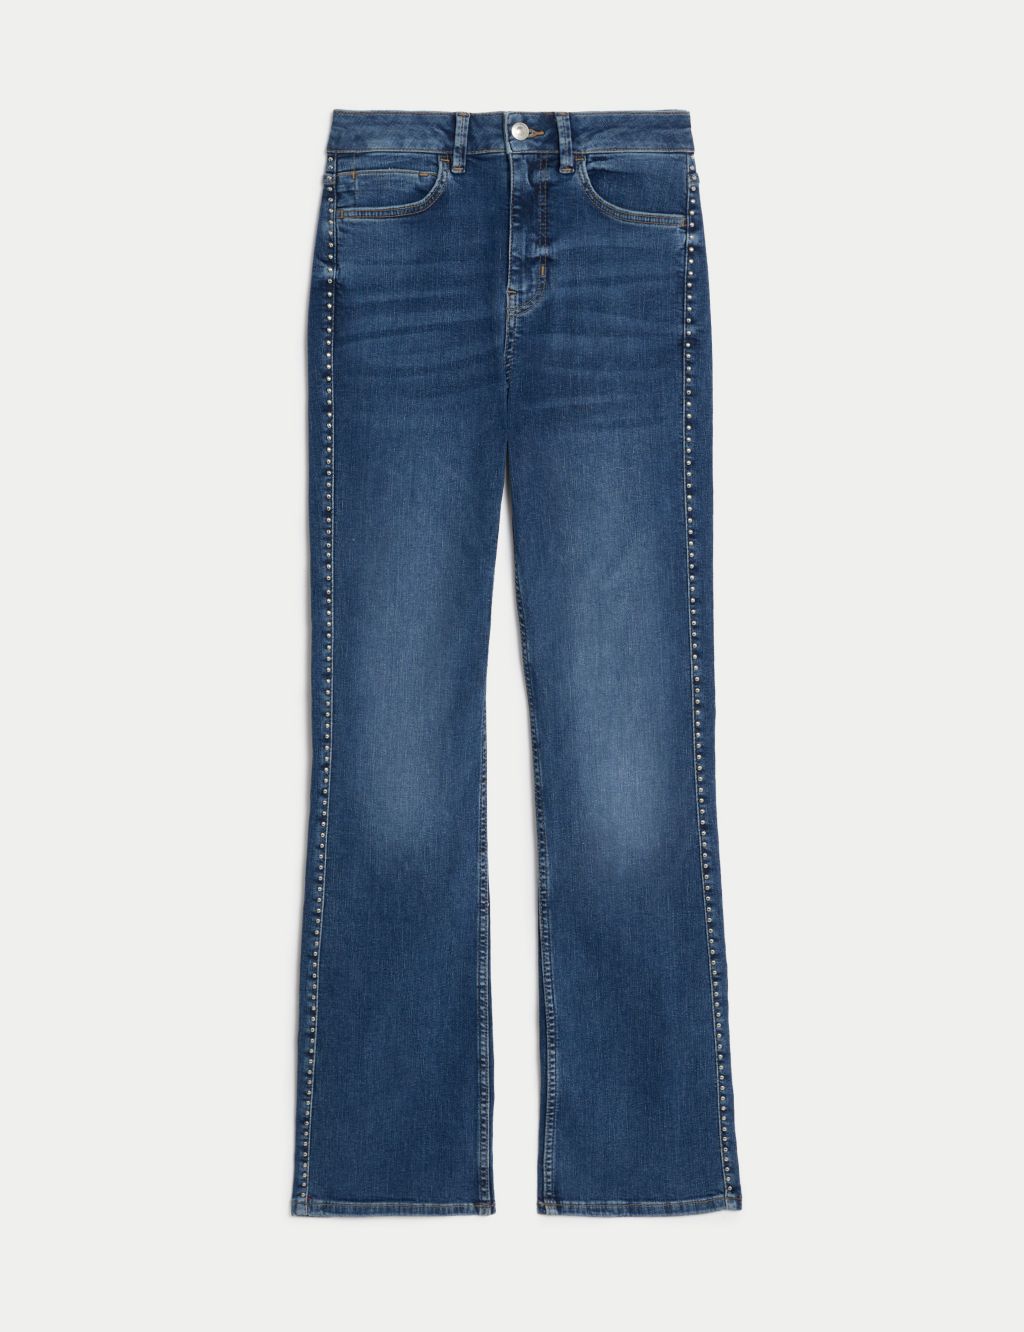 Eva High Waisted Stud Detail Bootcut Jeans image 2